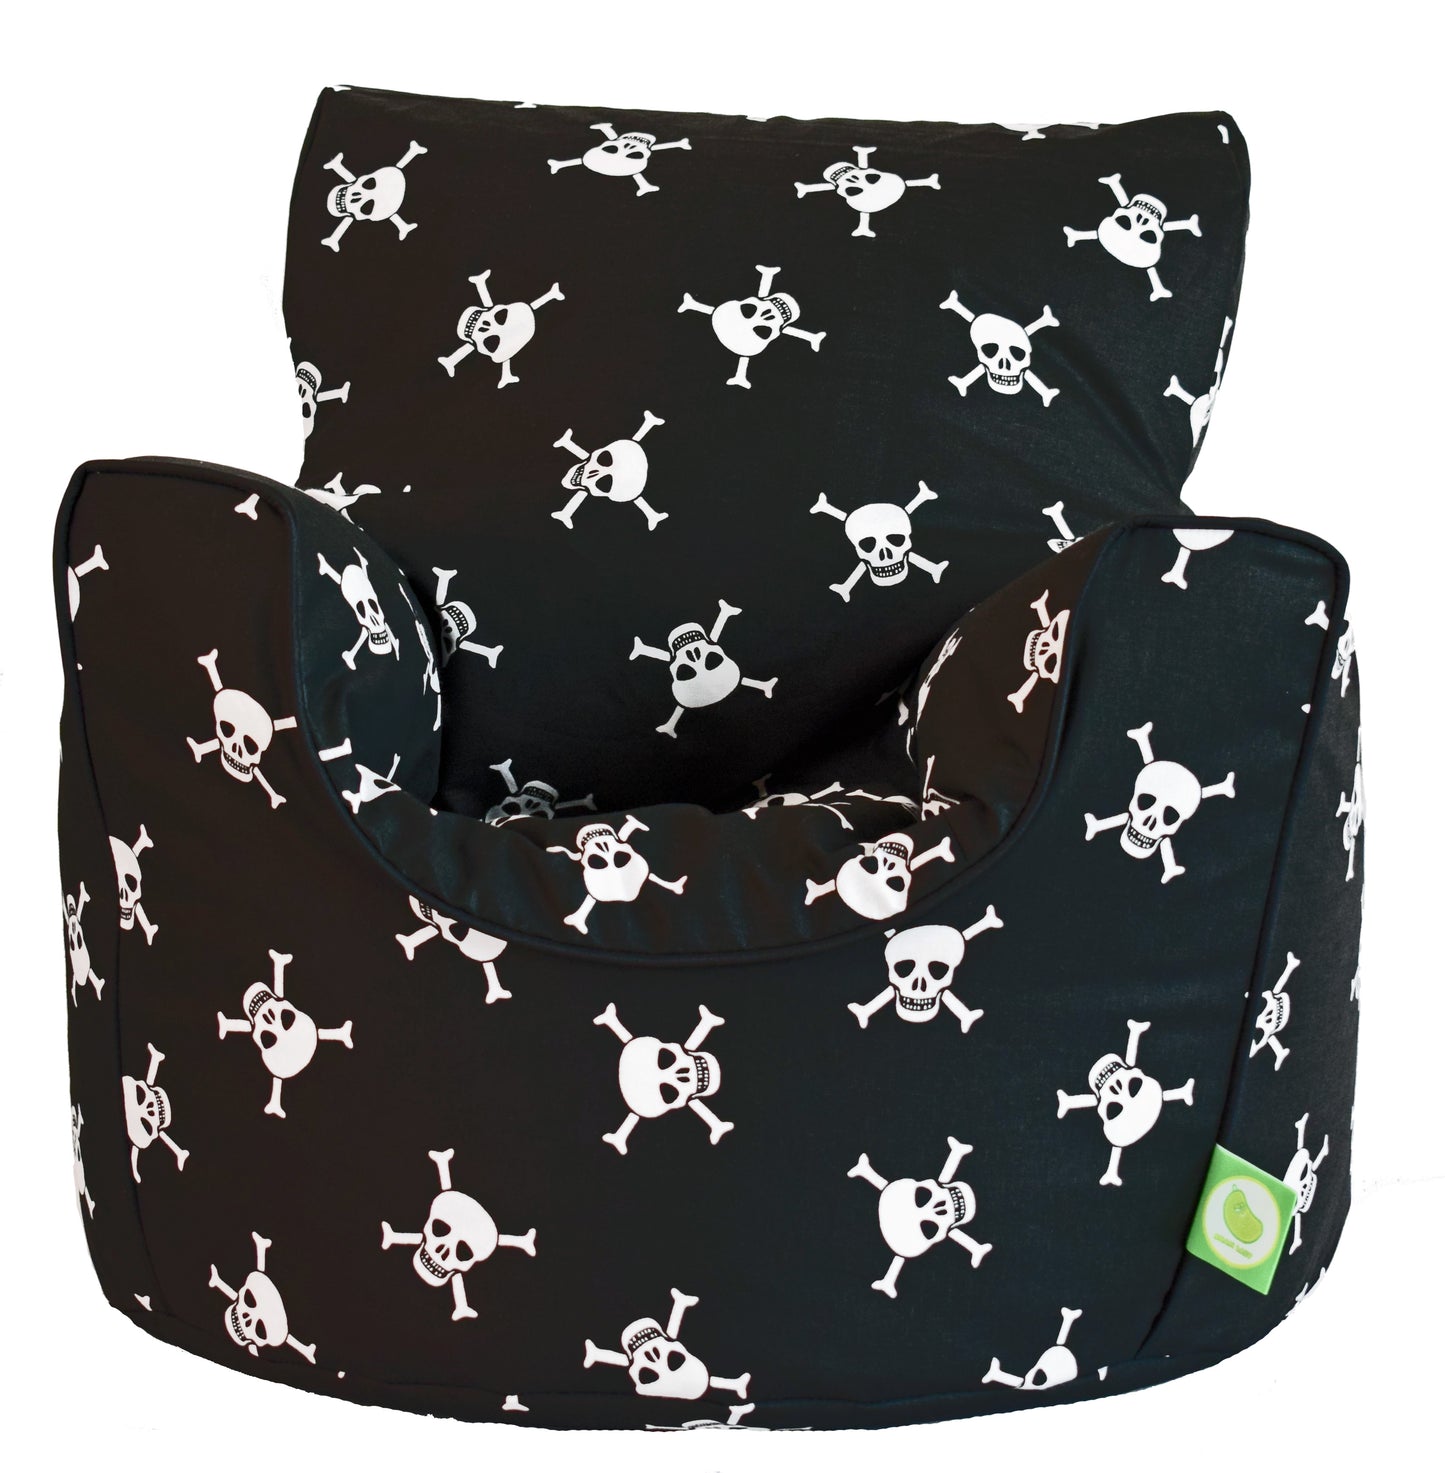 Cotton Black Pirate Skull and Cross Bones Bean Bag Arm Chair Toddler Size